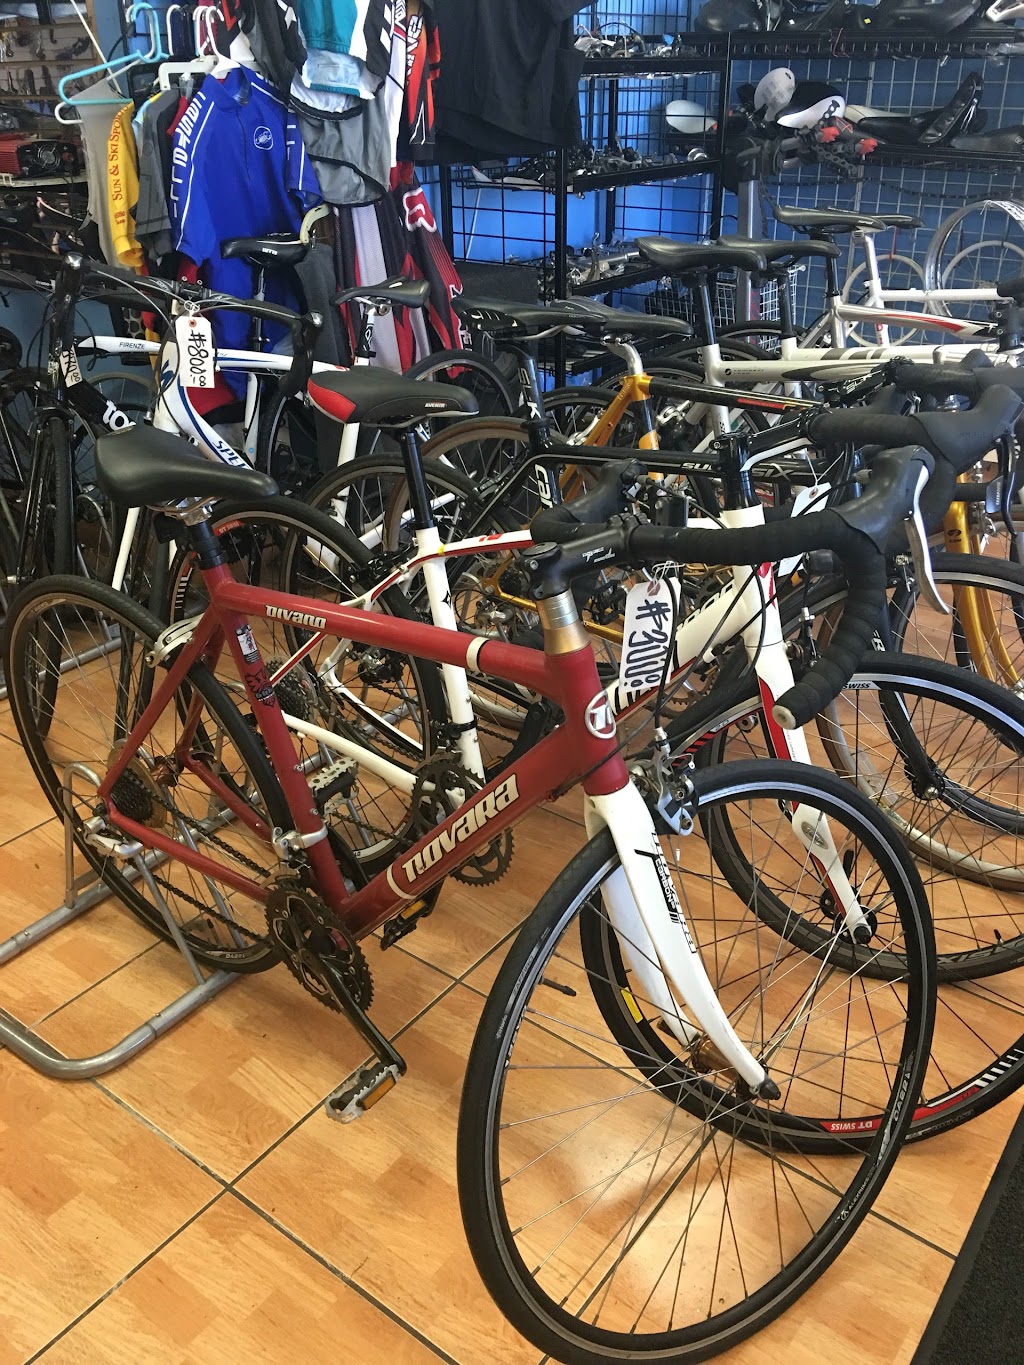 Good Guys Cycling | 110 S 7th Ave, La Puente, CA 91746, USA | Phone: (626) 679-3332